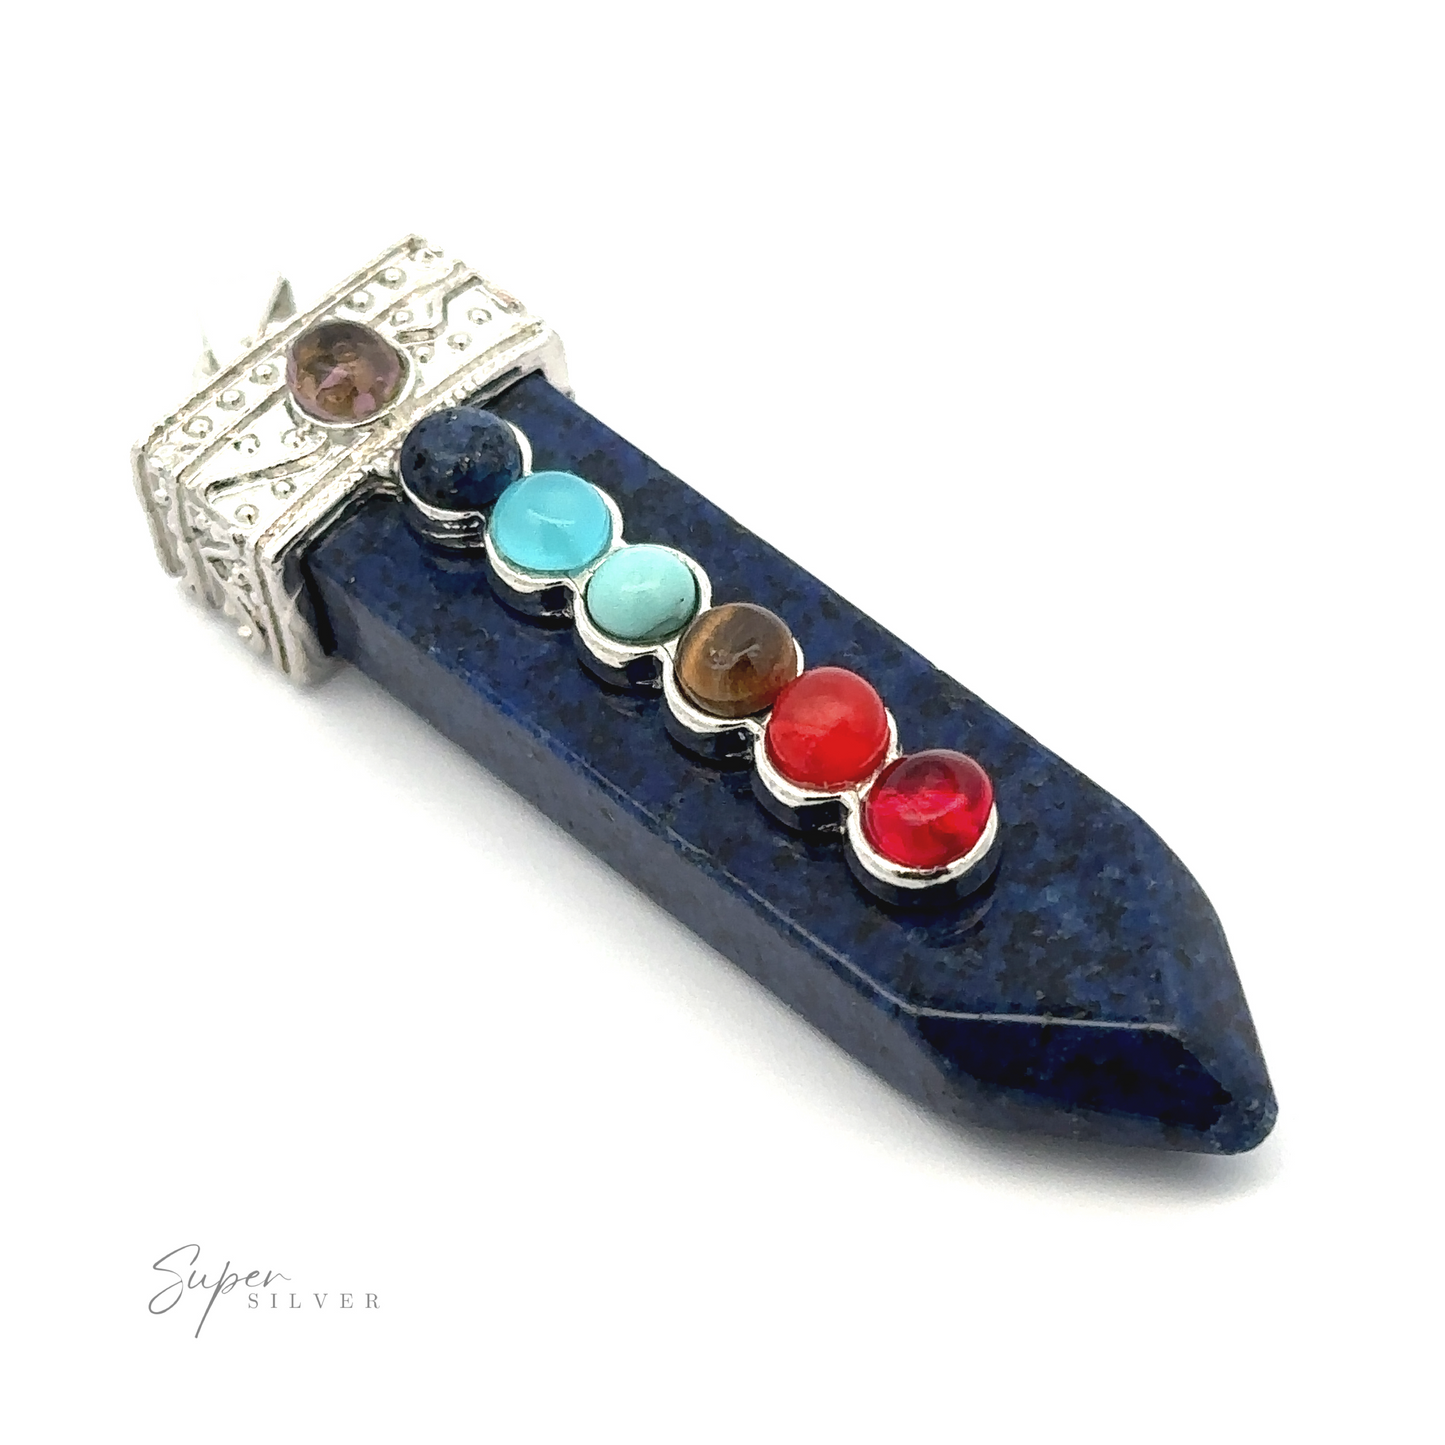 
                  
                    A stunning Obelisk Crystal Pendant with Small Chakra Stones featuring a blue gemstone base with six chakra stones of varying colors arranged vertically, all set in a silver-plated design.
                  
                